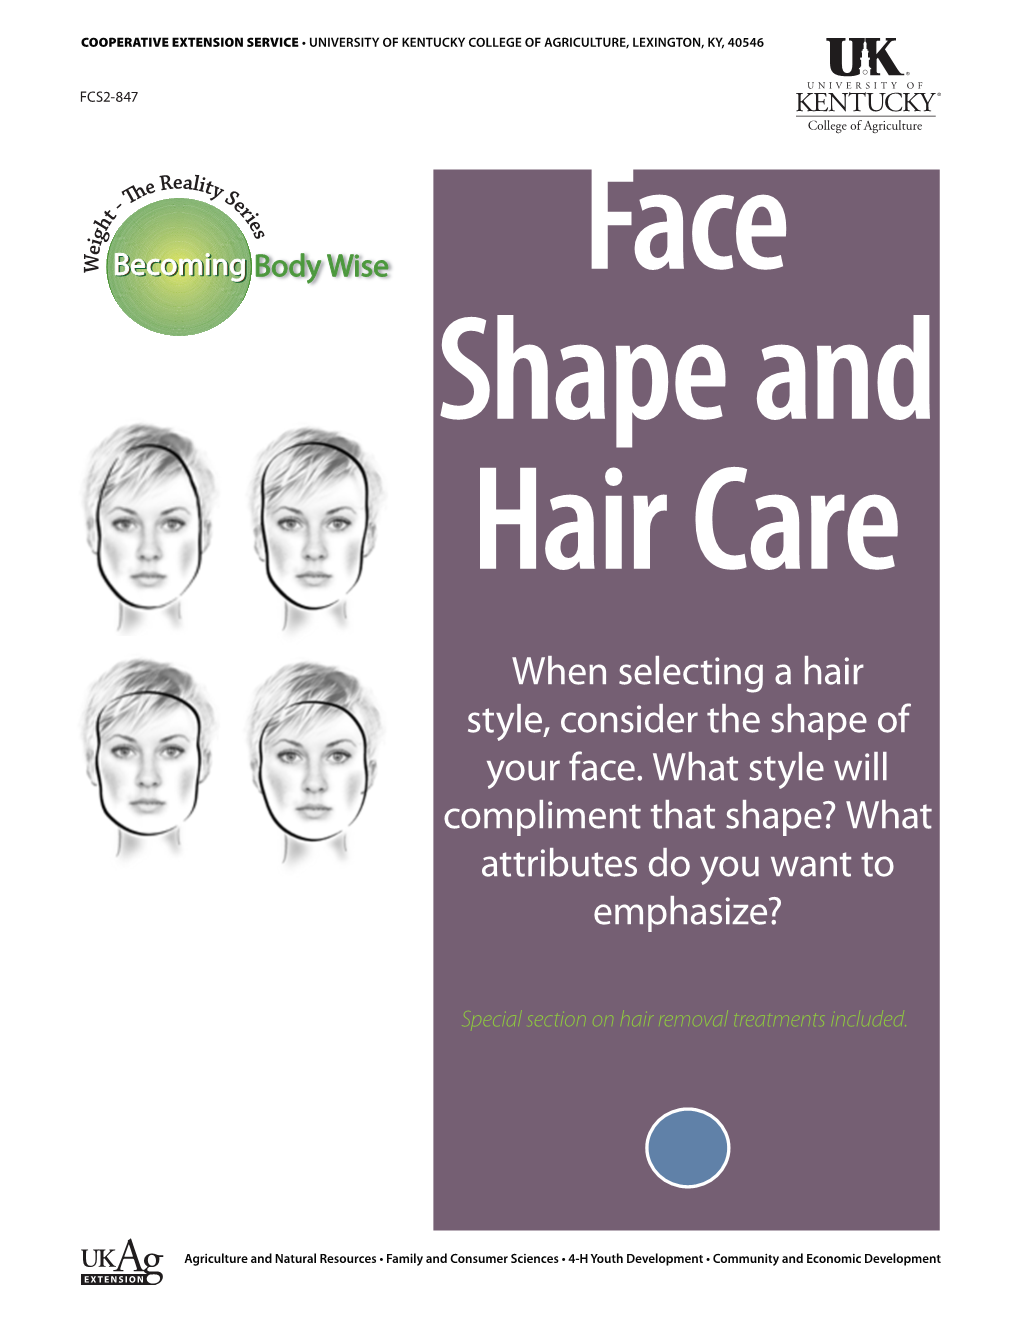 Fcs2-847: Face Shape and Hair Care